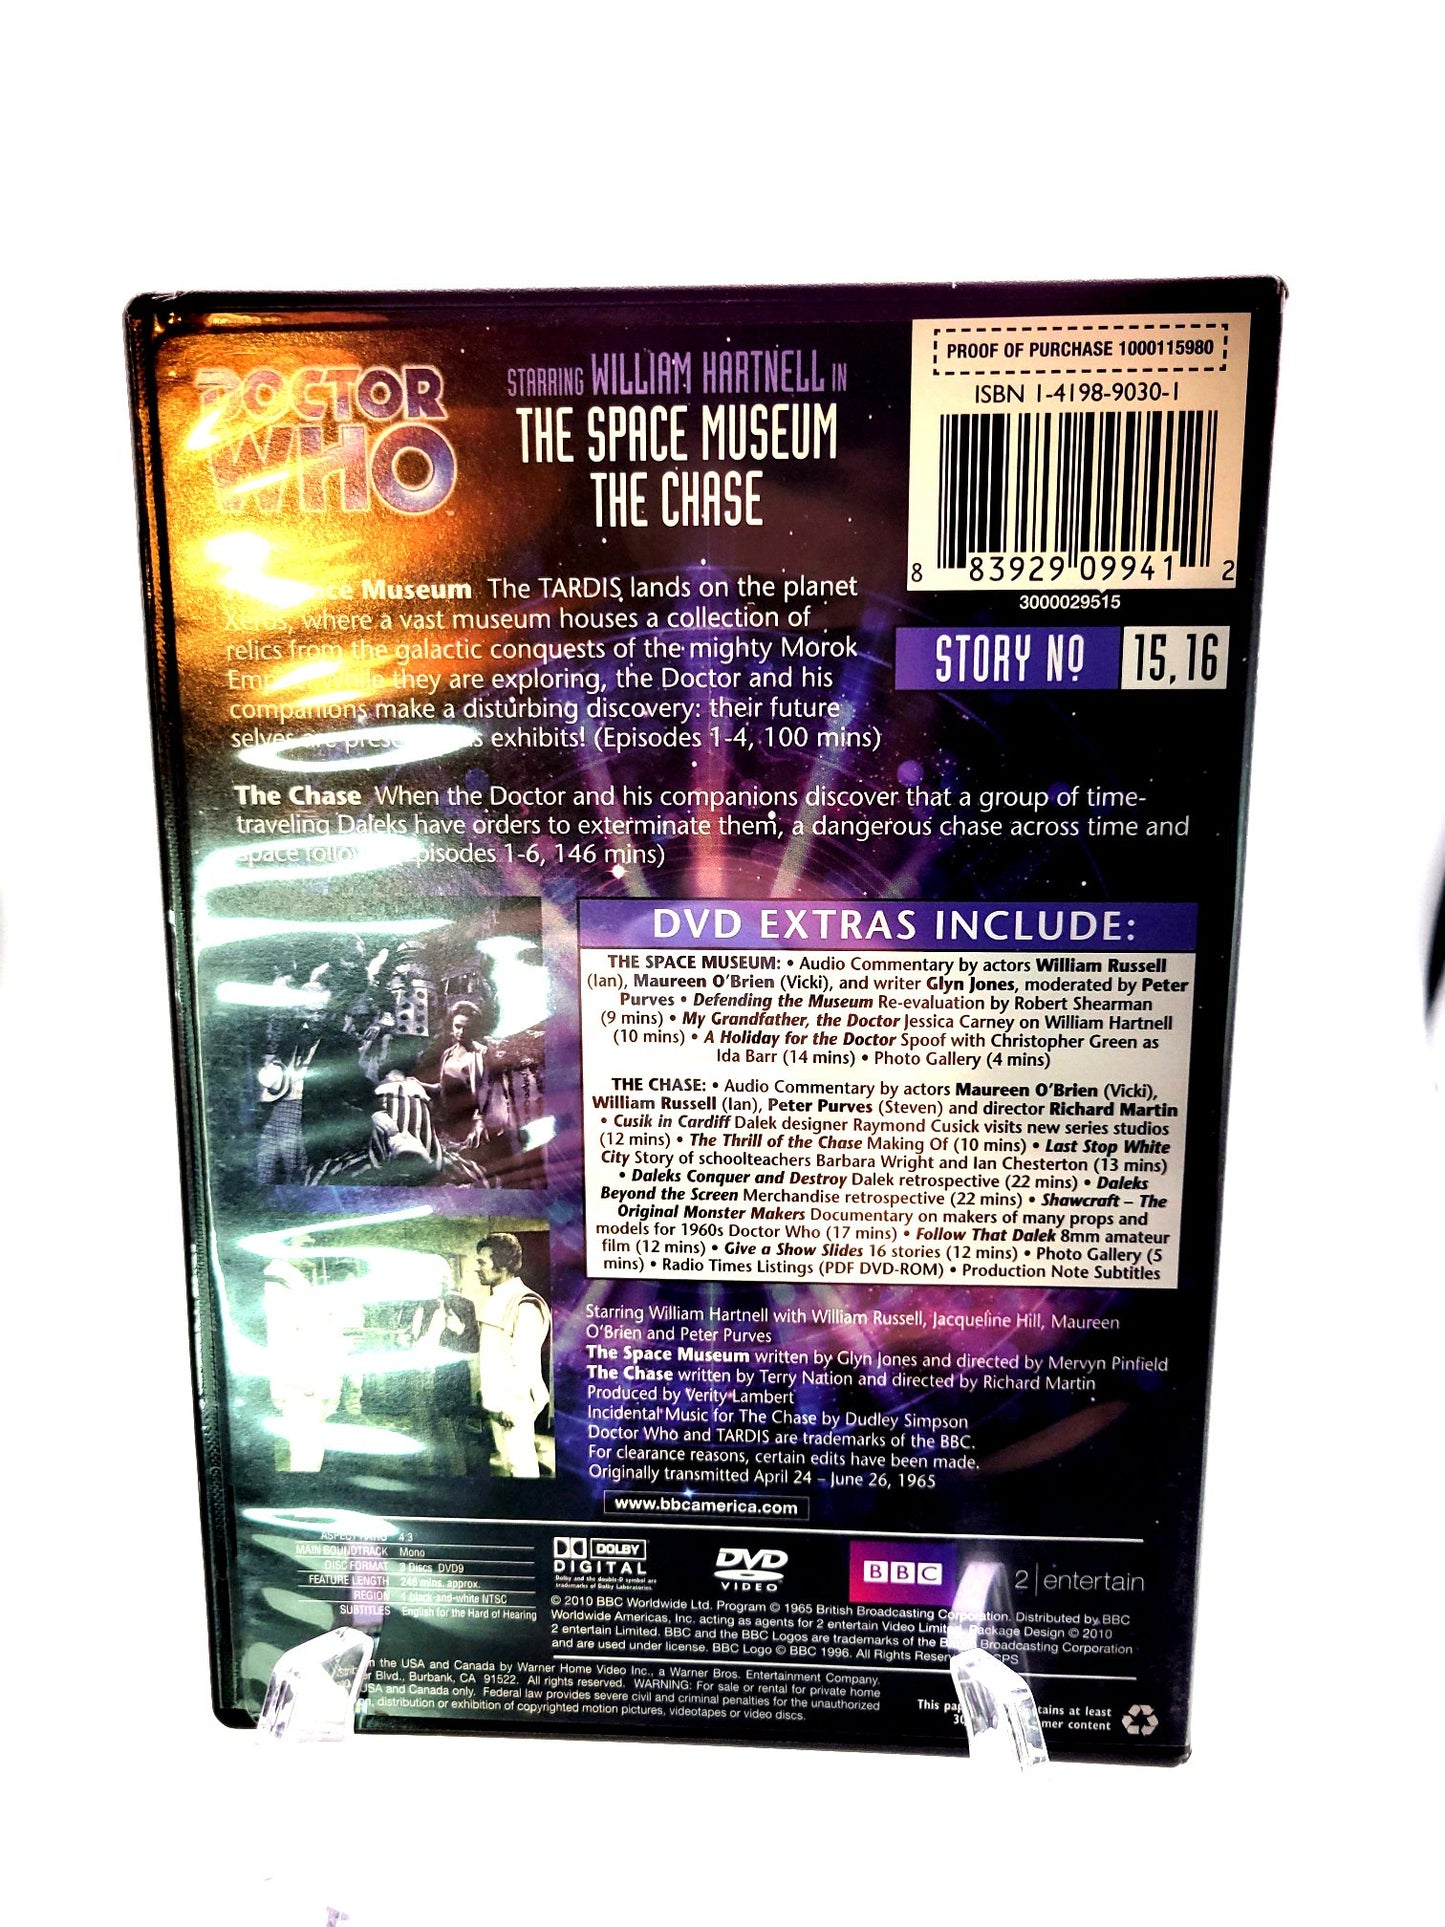 BBC Video Doctor Who The Space Museum and The Chase DVD Set